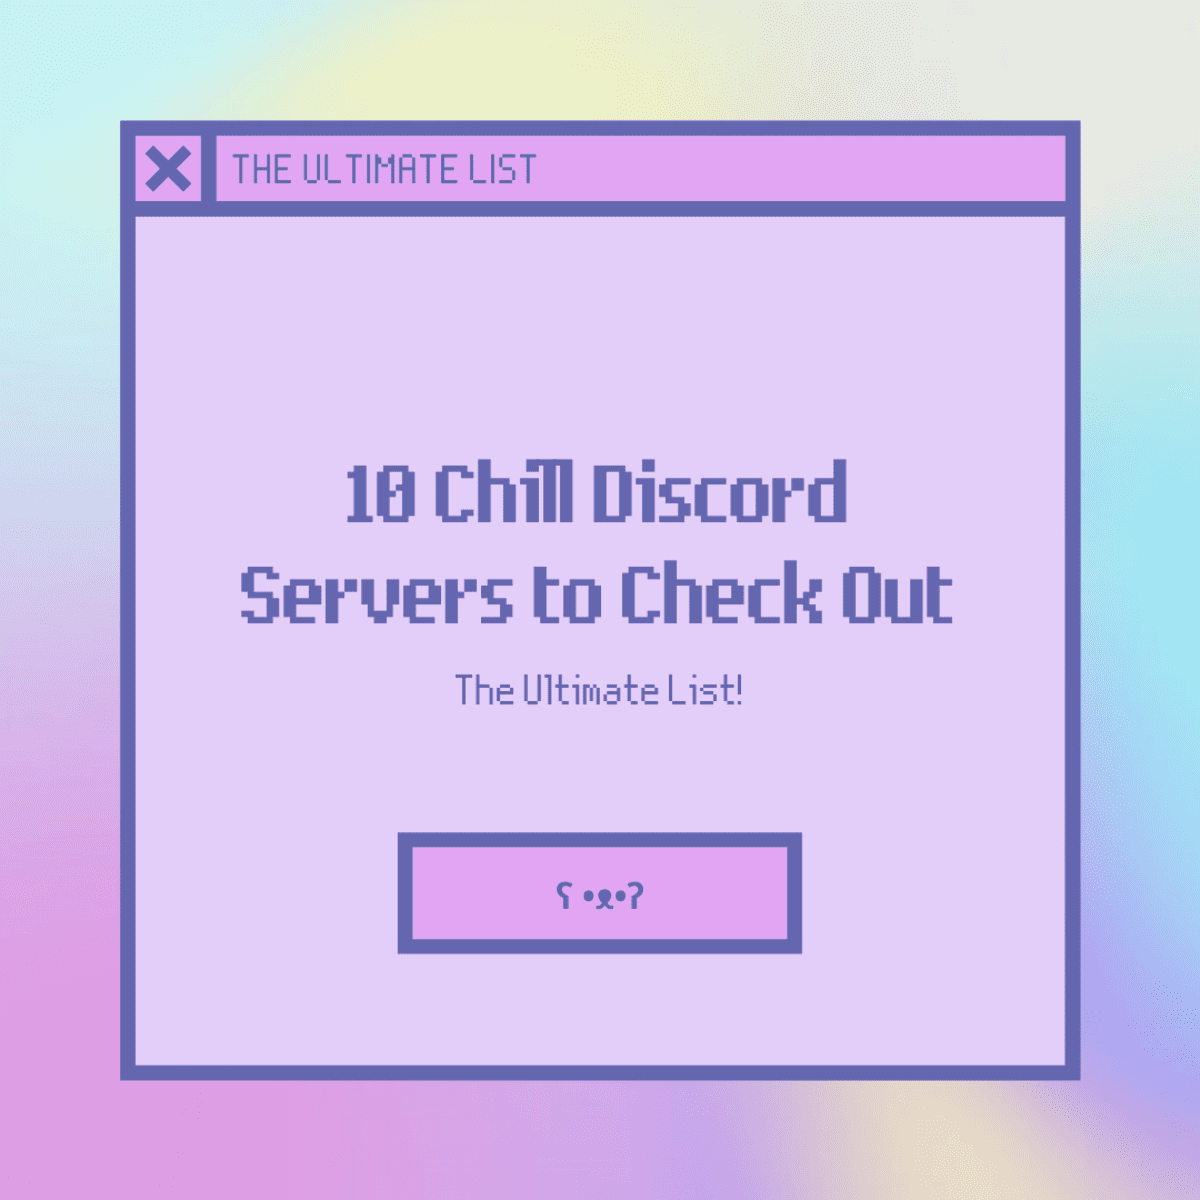 Public Discord Servers tagged with Fun And Chill